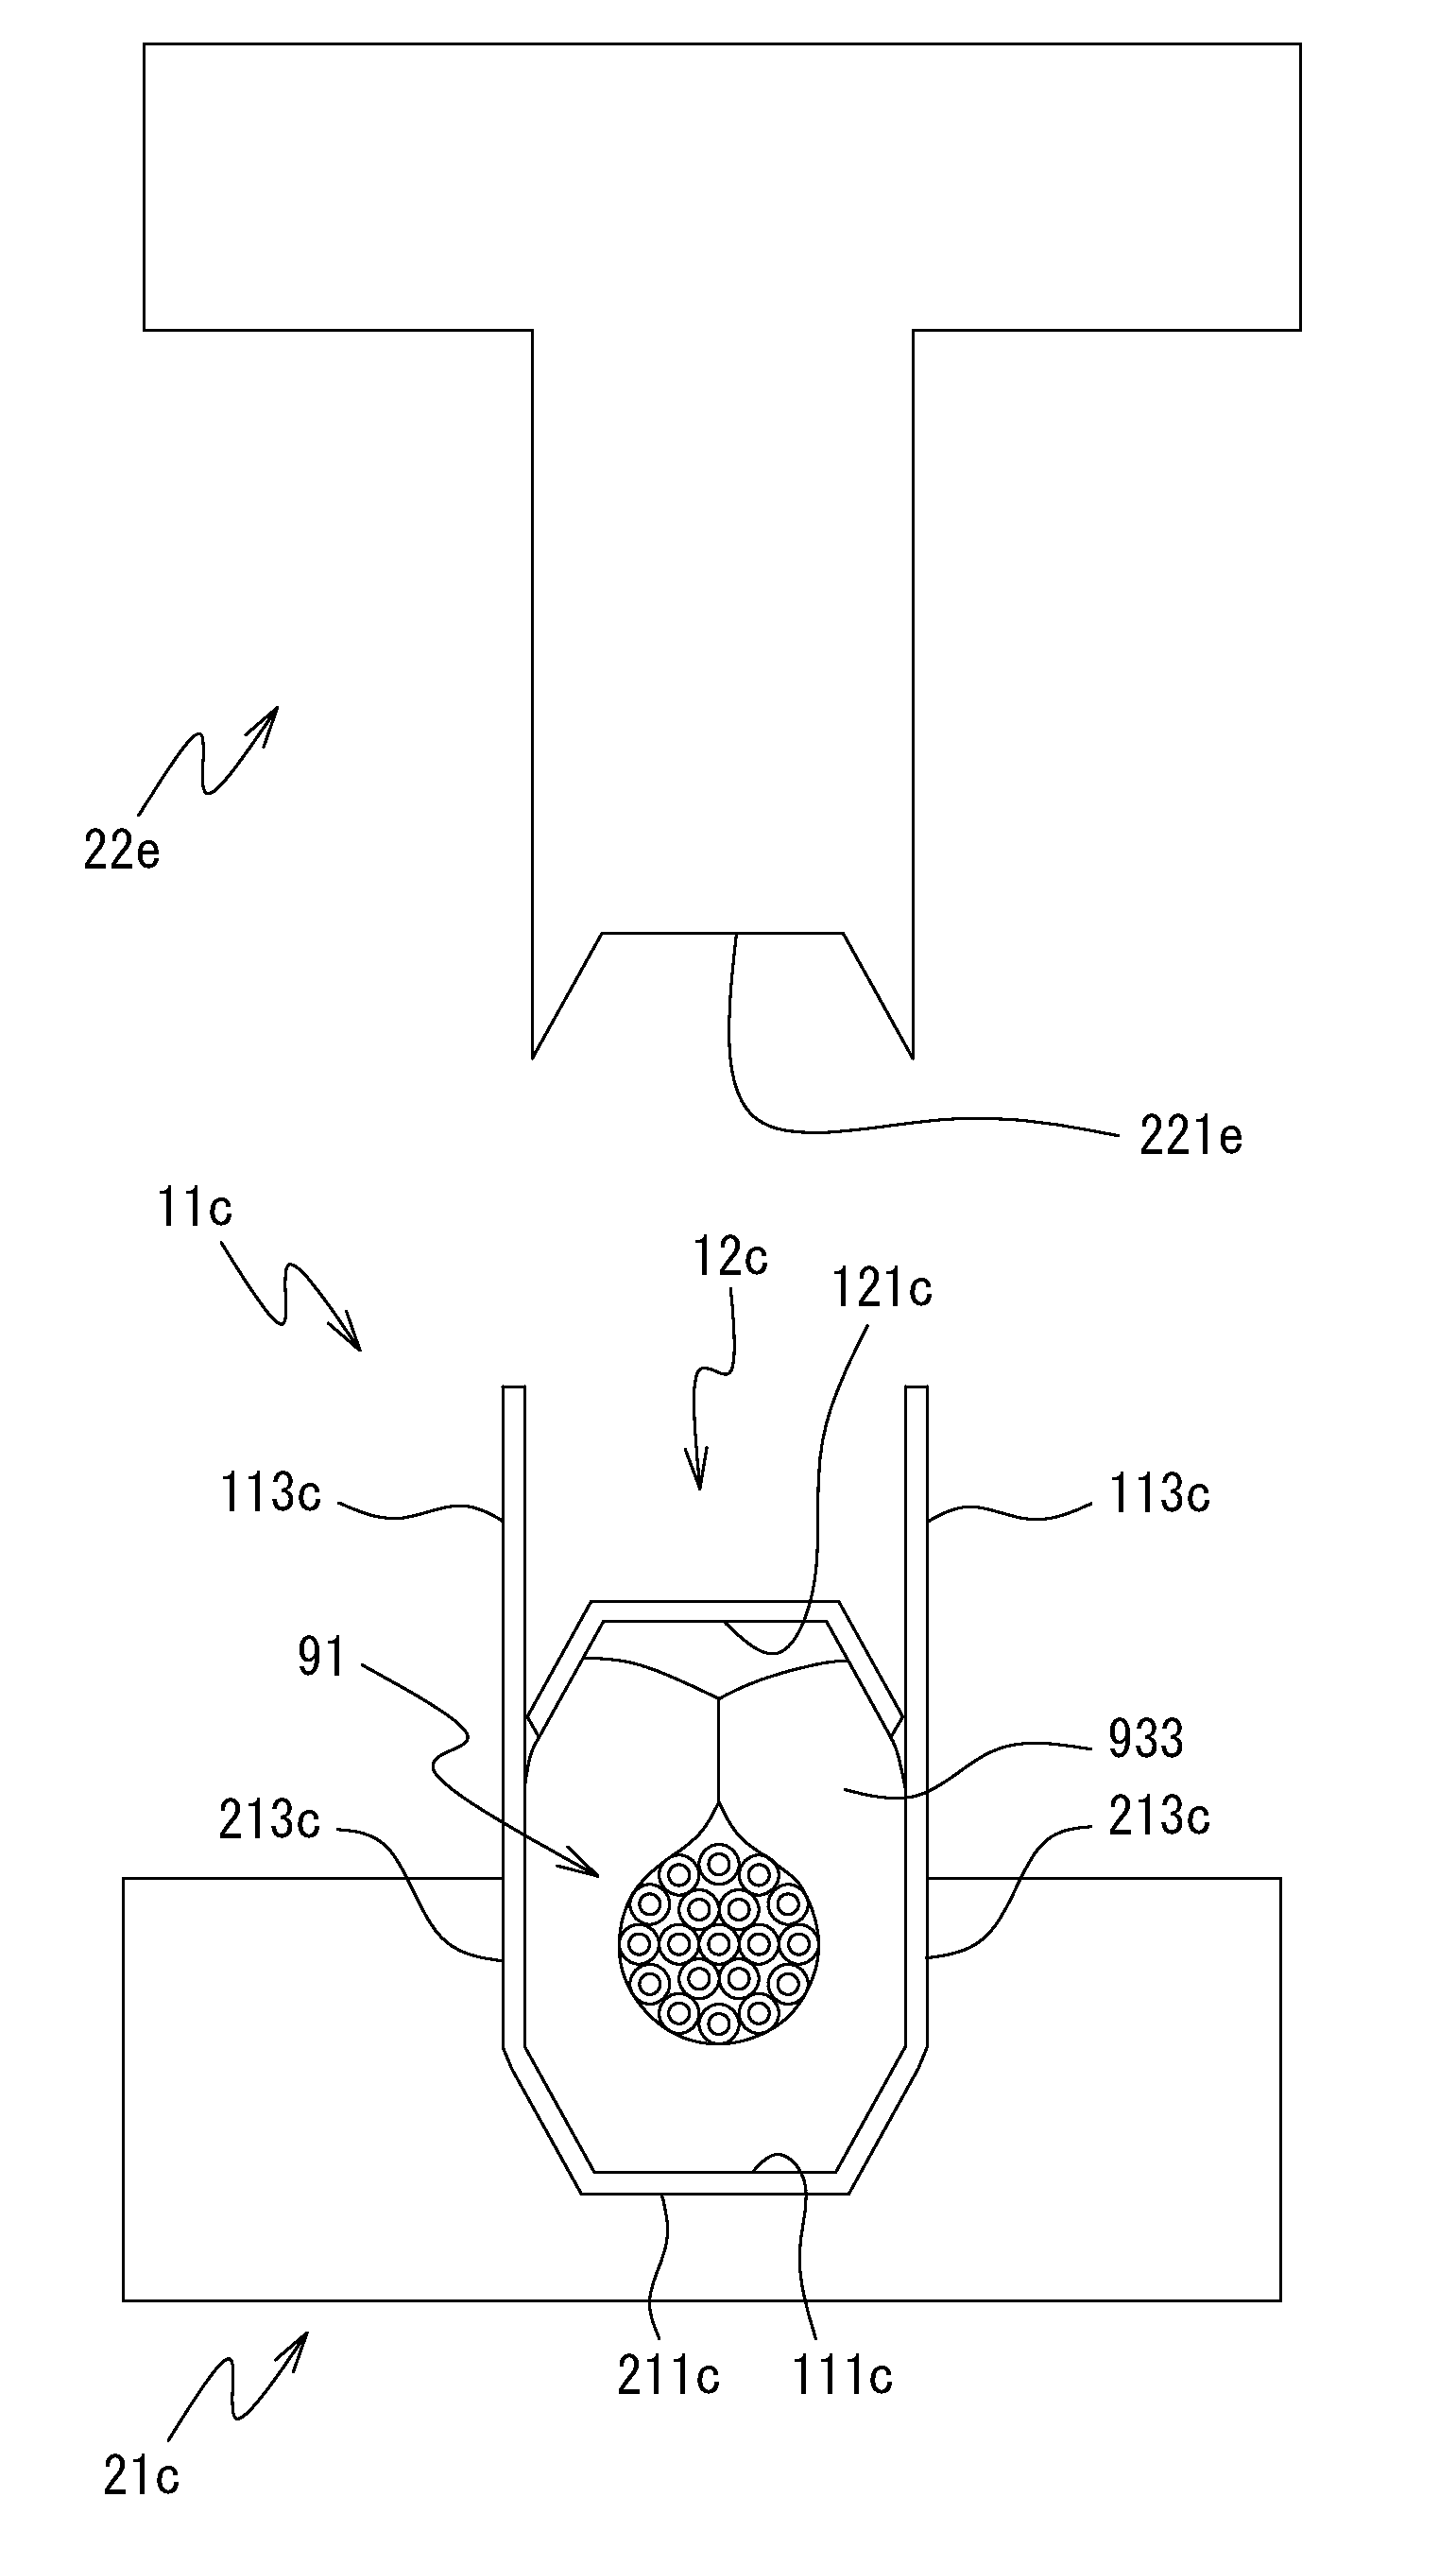 Wire harness manufacturing method